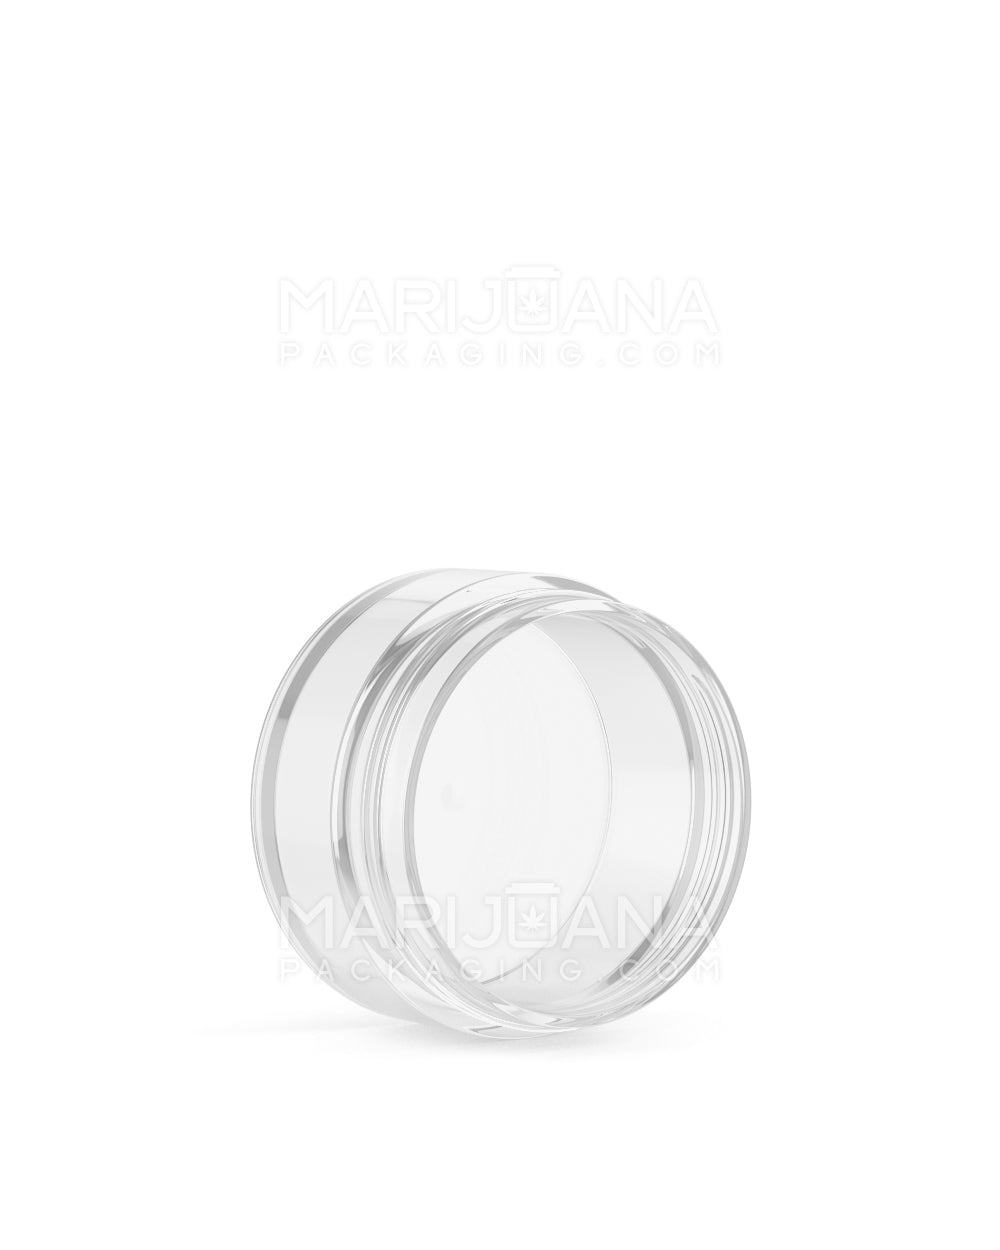 Clear Concentrate Containers w/ Screw Top Cap | 15mL - Plastic - 200 Count - 6